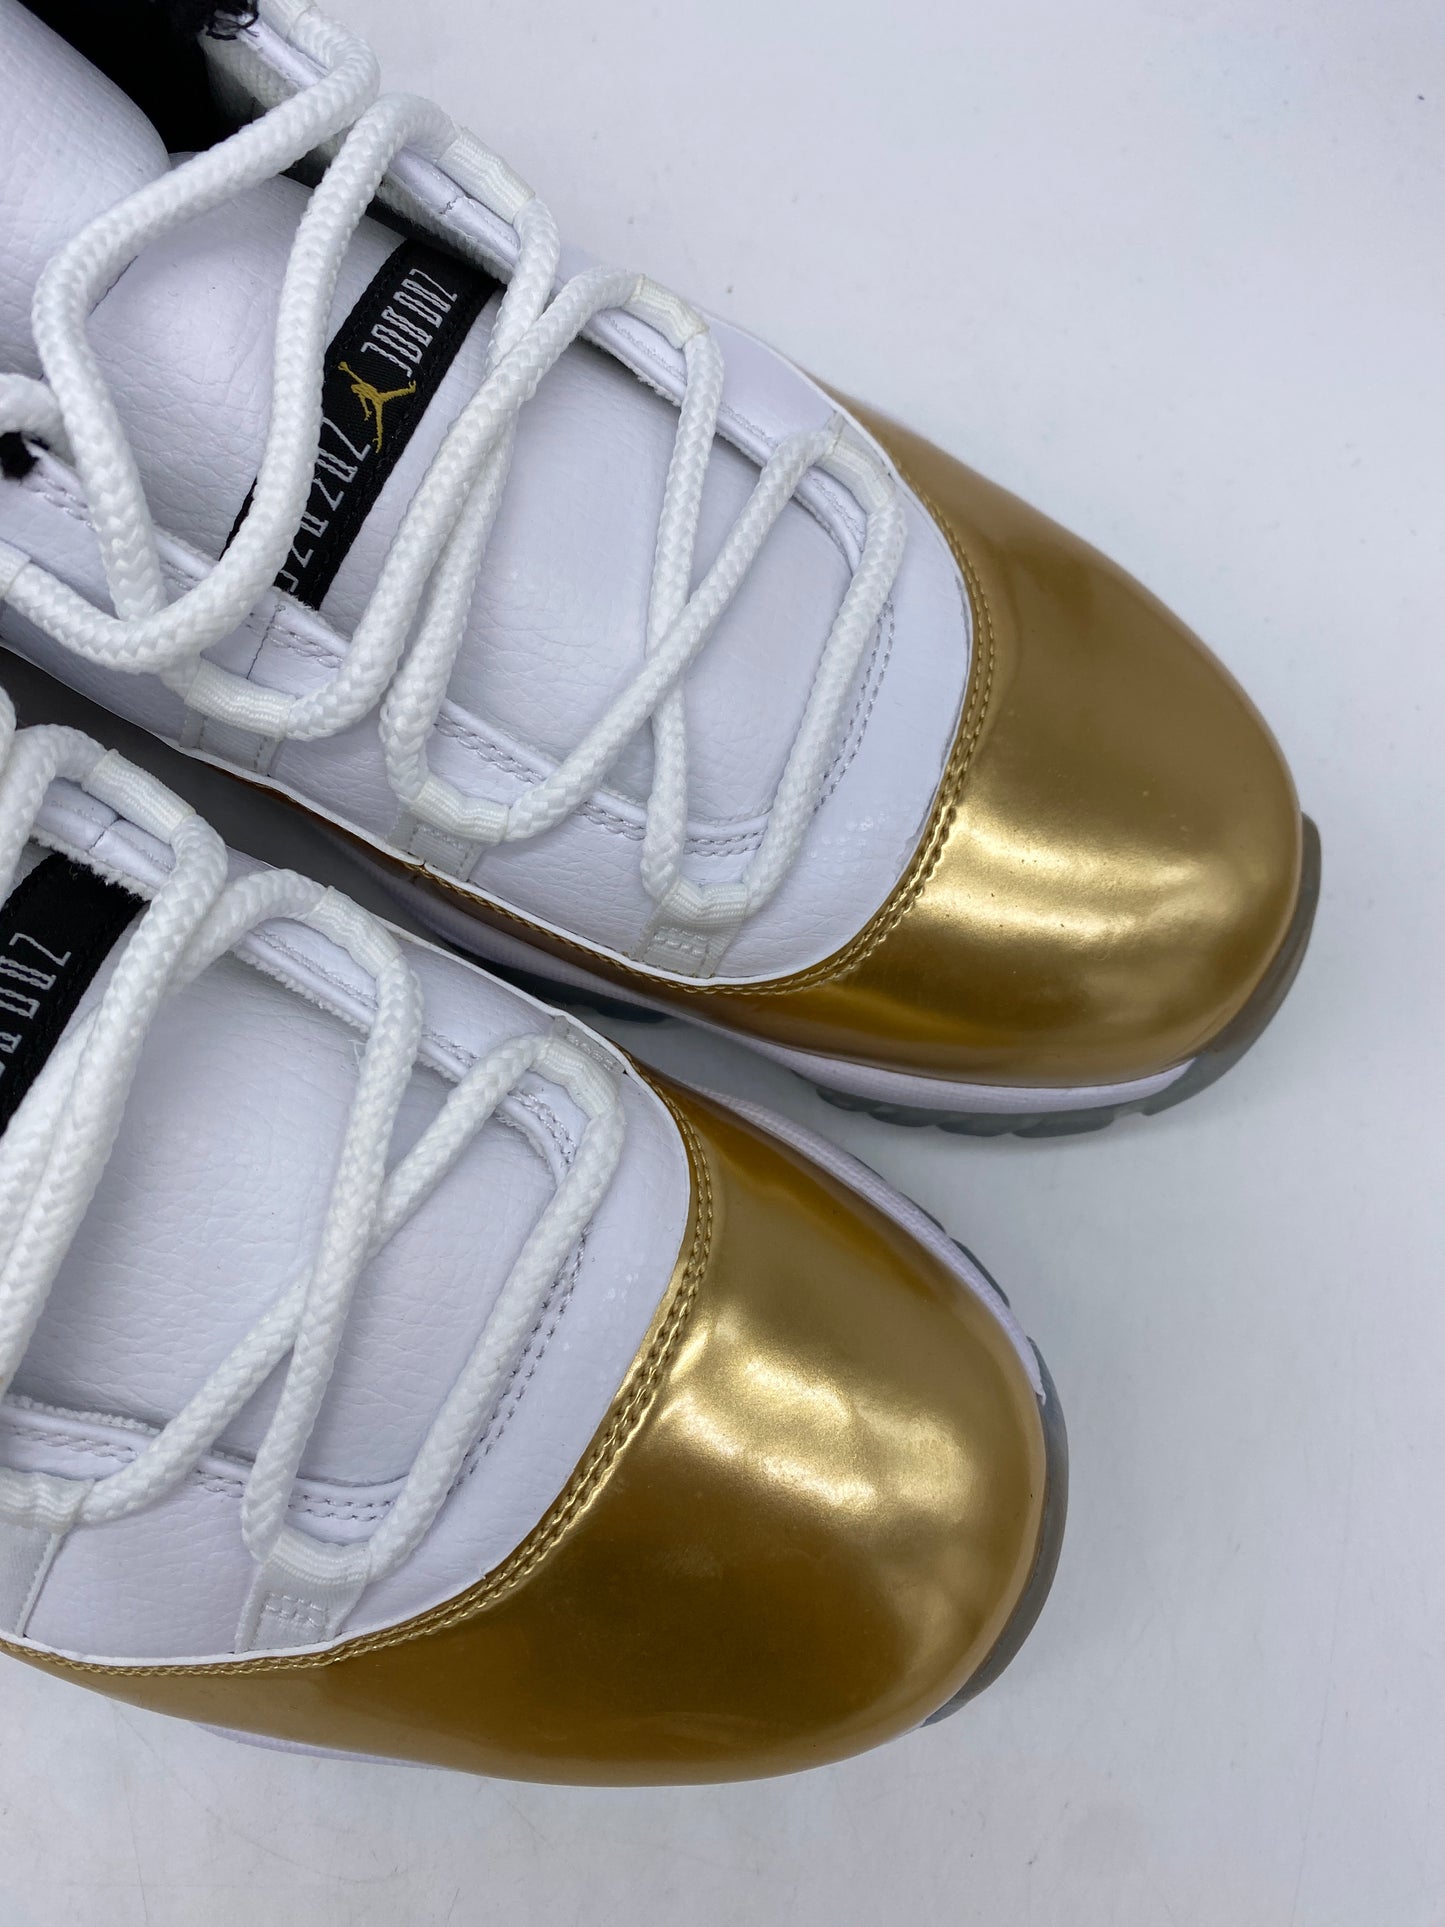 Load image into Gallery viewer, Preowned Jordan 11 Retro Low Closing Ceremony Sz 13M/14.5W
